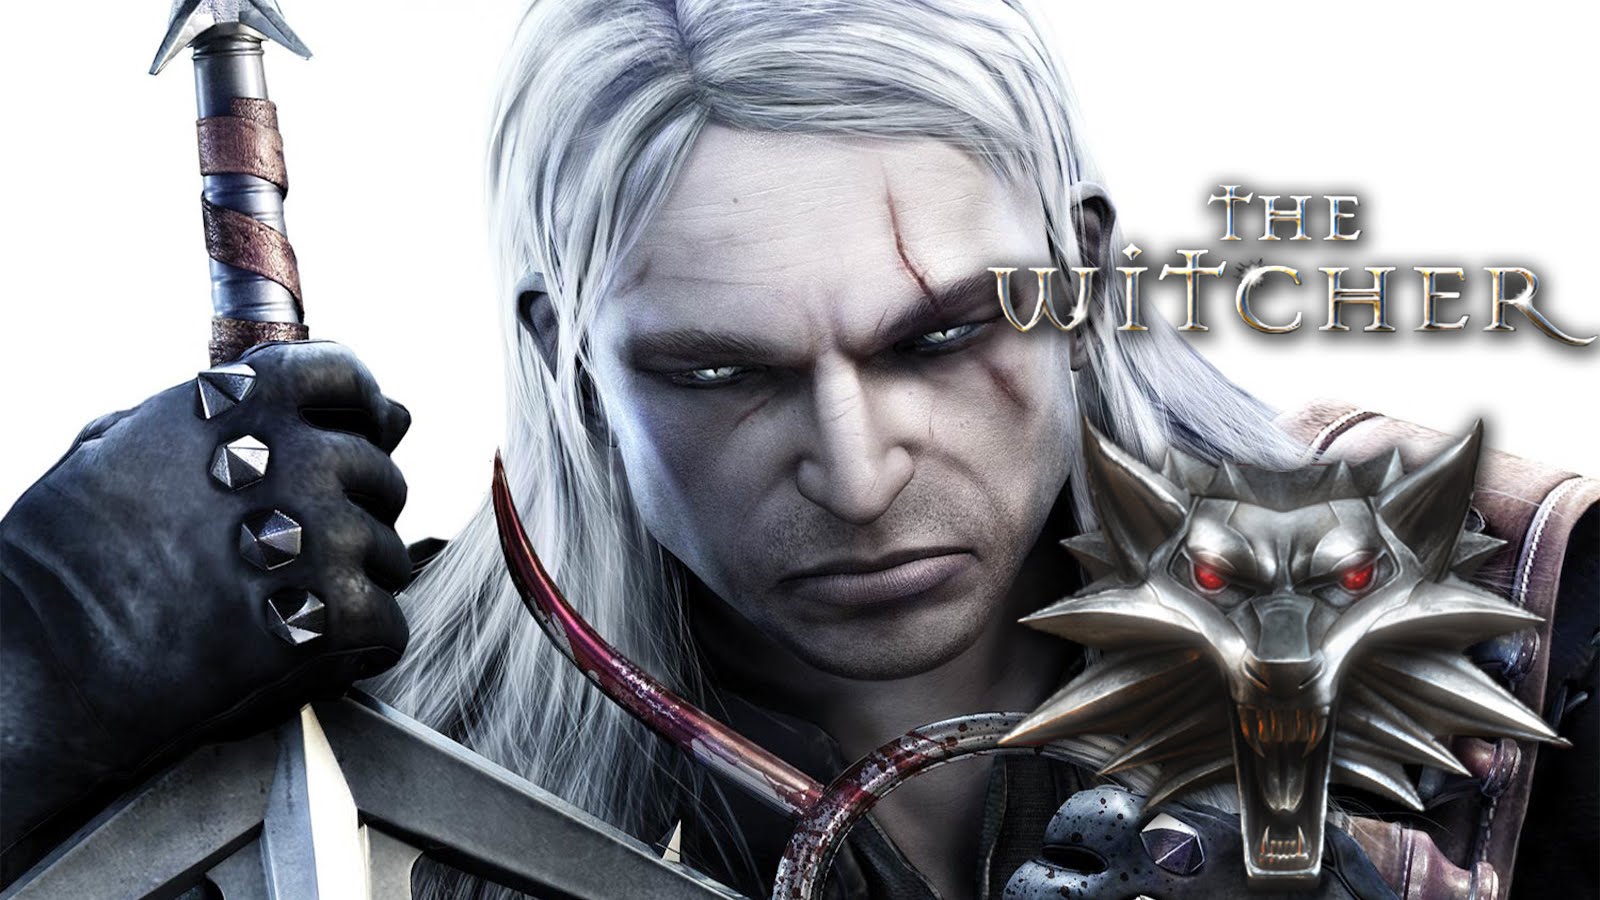 Witcher (The) : Enhanced Edition